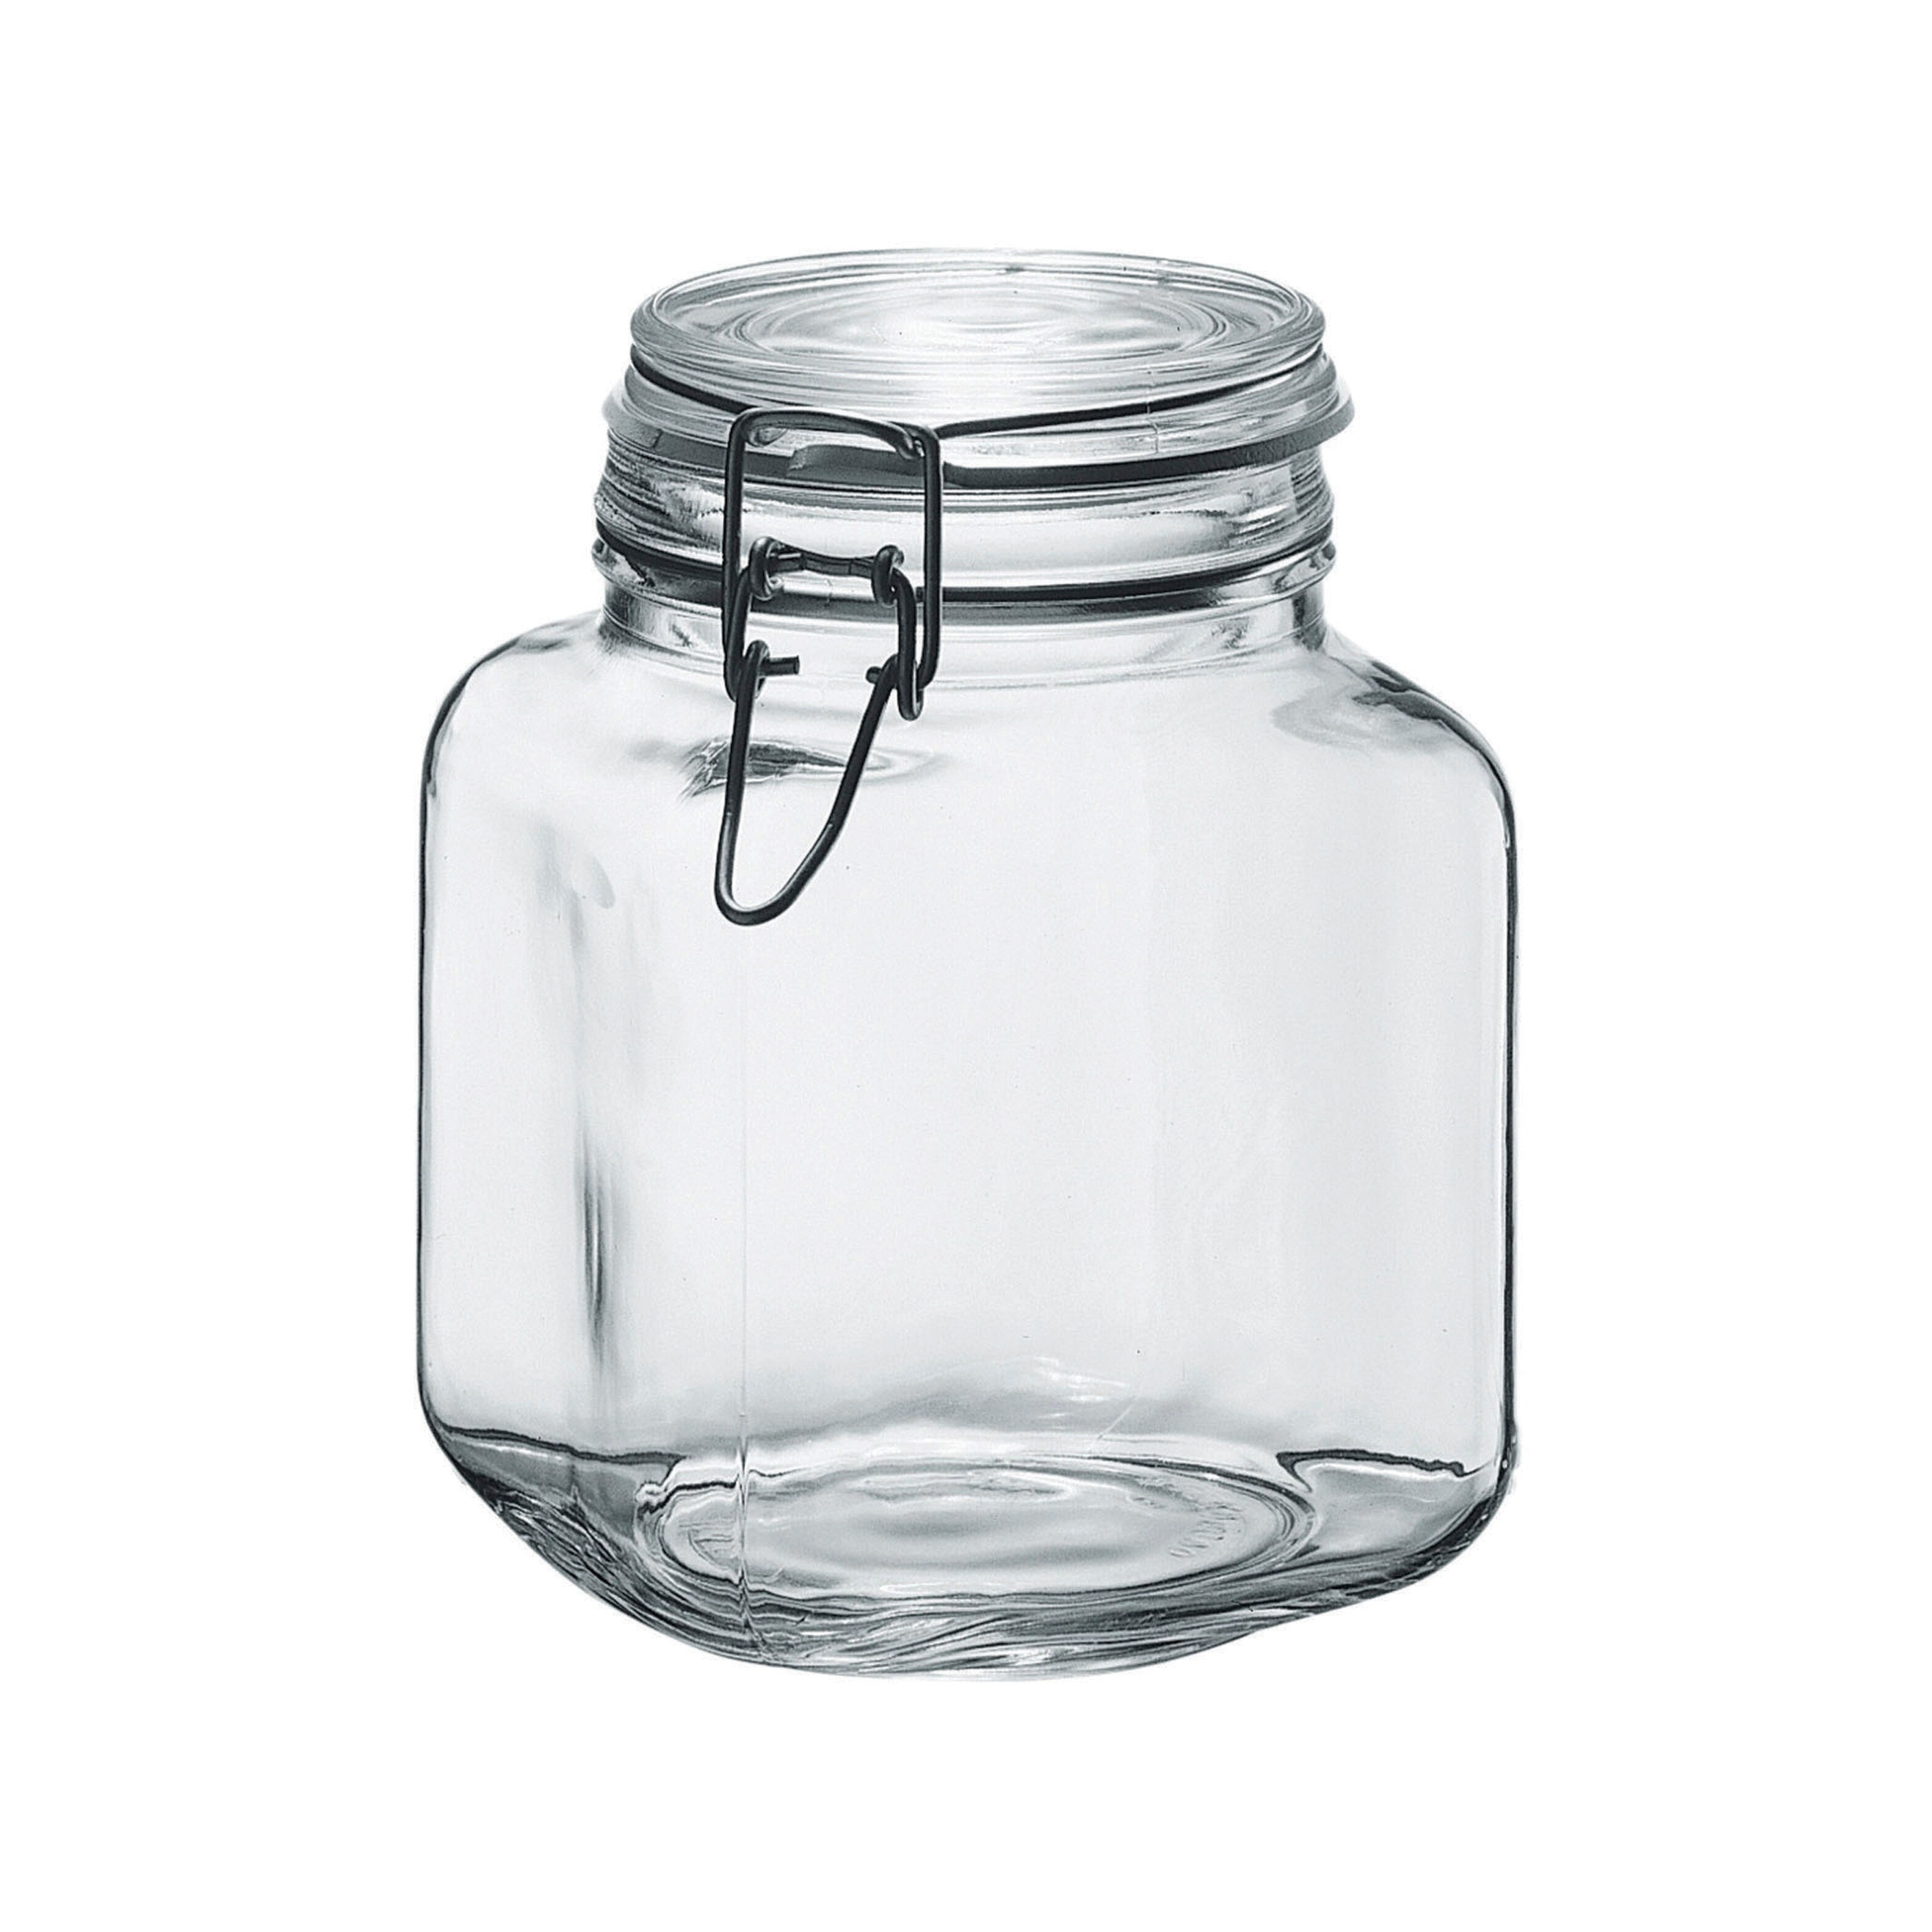 https://ak1.ostkcdn.com/images/products/is/images/direct/139bf0b0c14ab6b13fccf8a0455784ab0d134501/Amici-Home-Glass-Hermetic-Preserving-Canning-Jar-Set-of-2.jpg